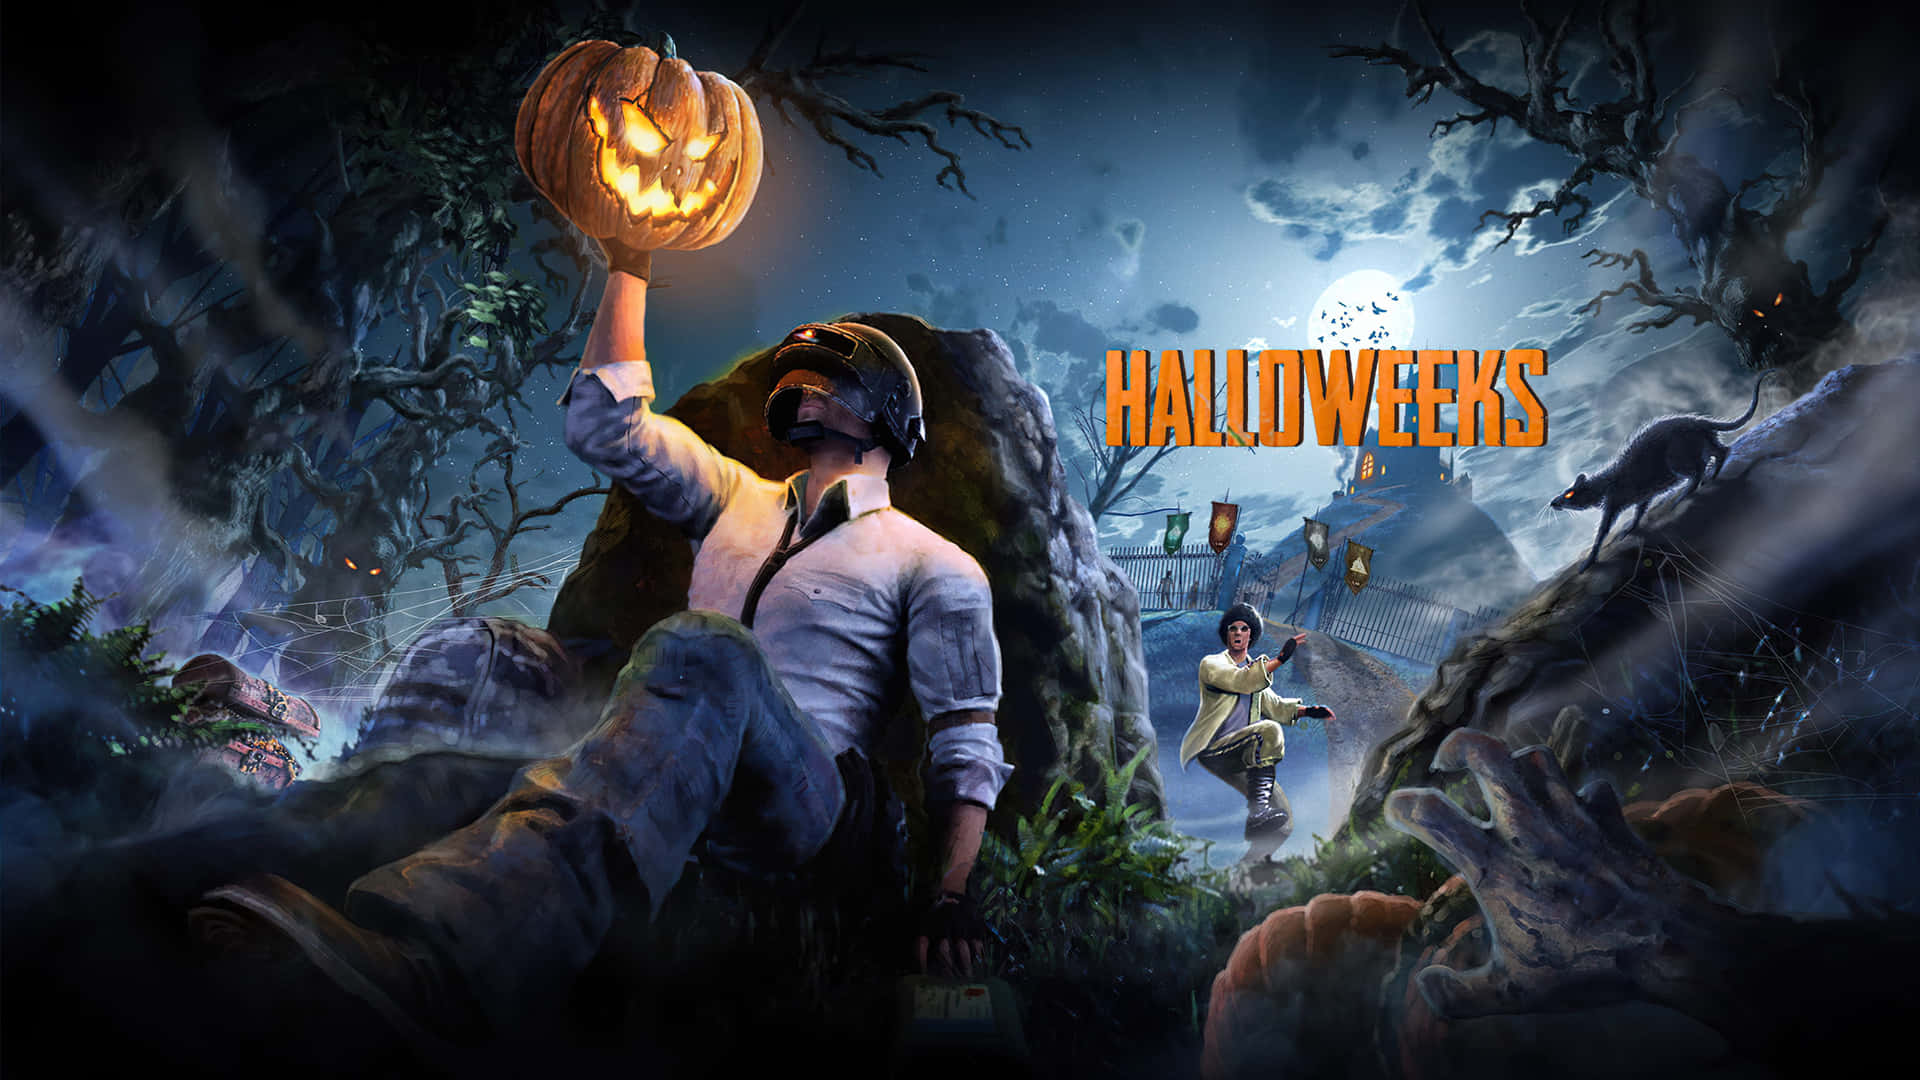 Enjoy memorable times with friends at your Halloween Games event. Wallpaper